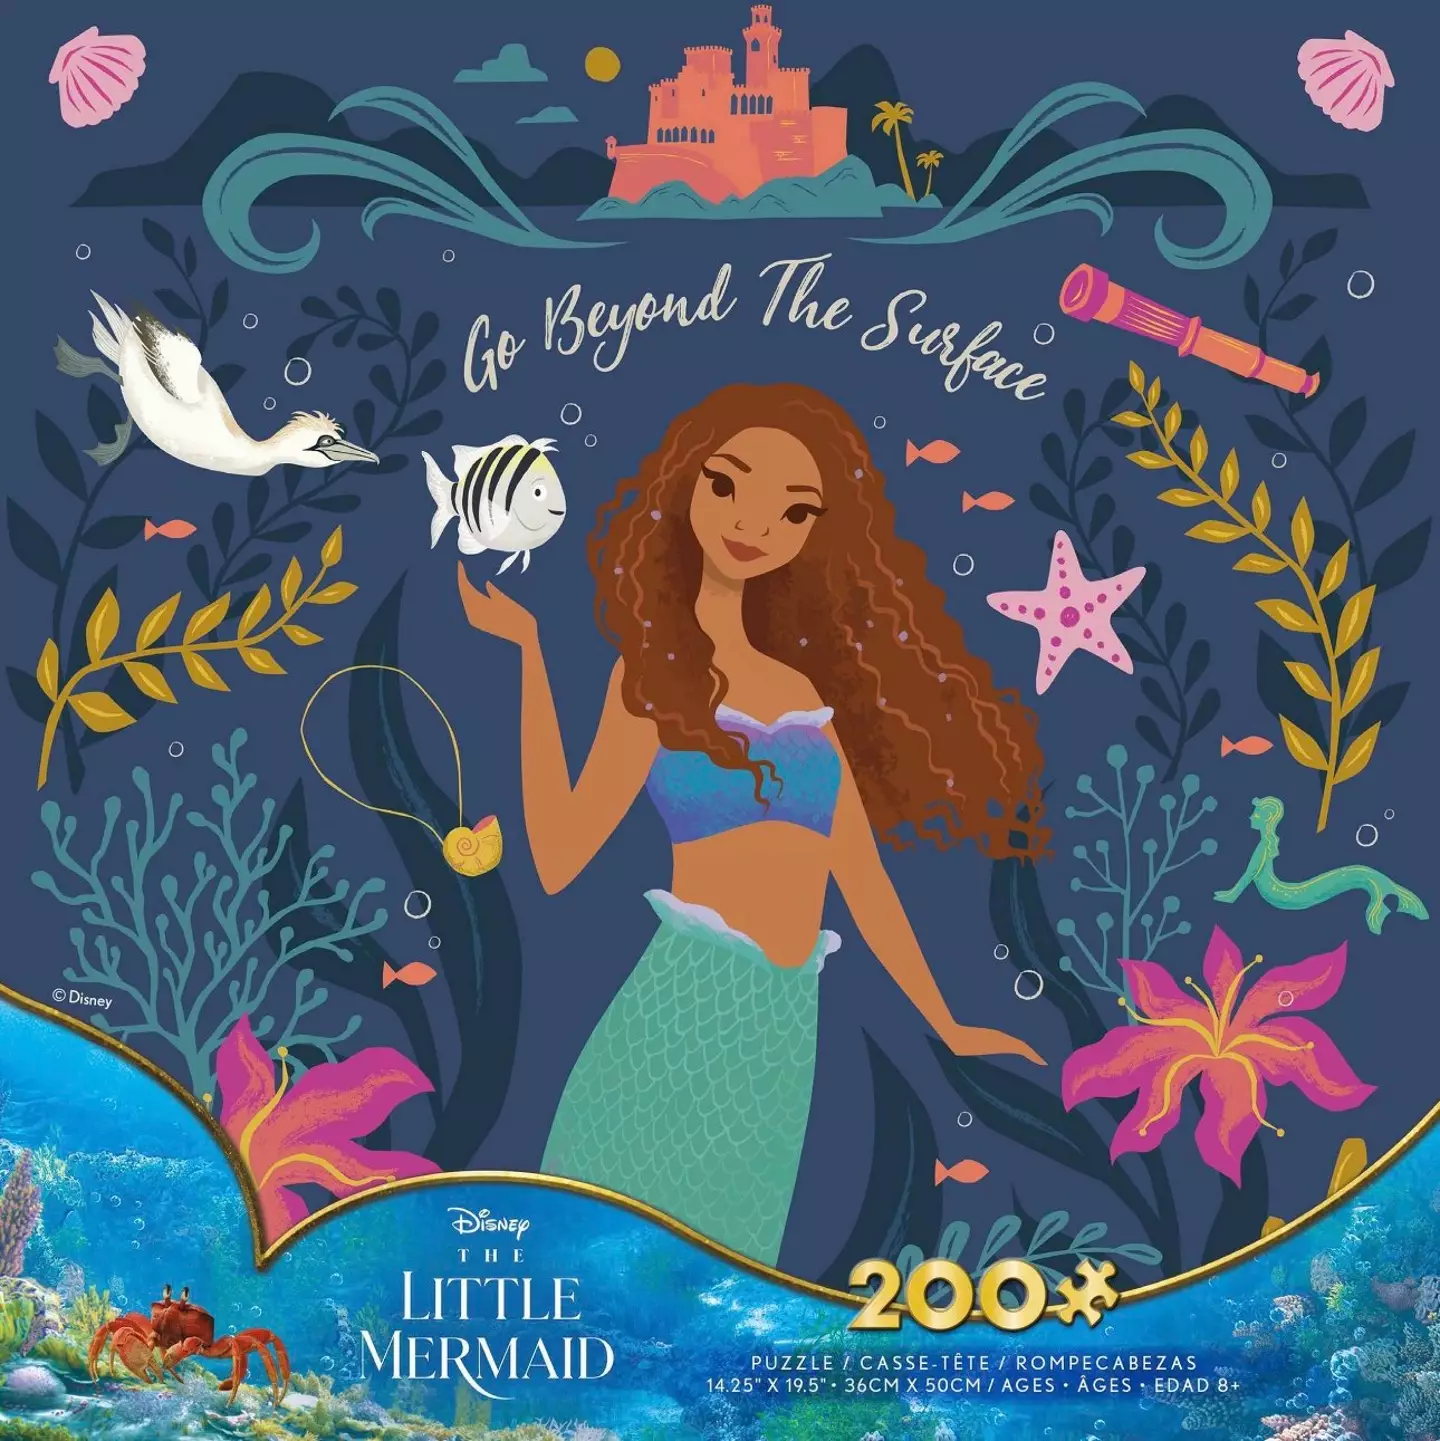 The cover for a Little Mermaid puzzle shows Sebastian's apparent new design.